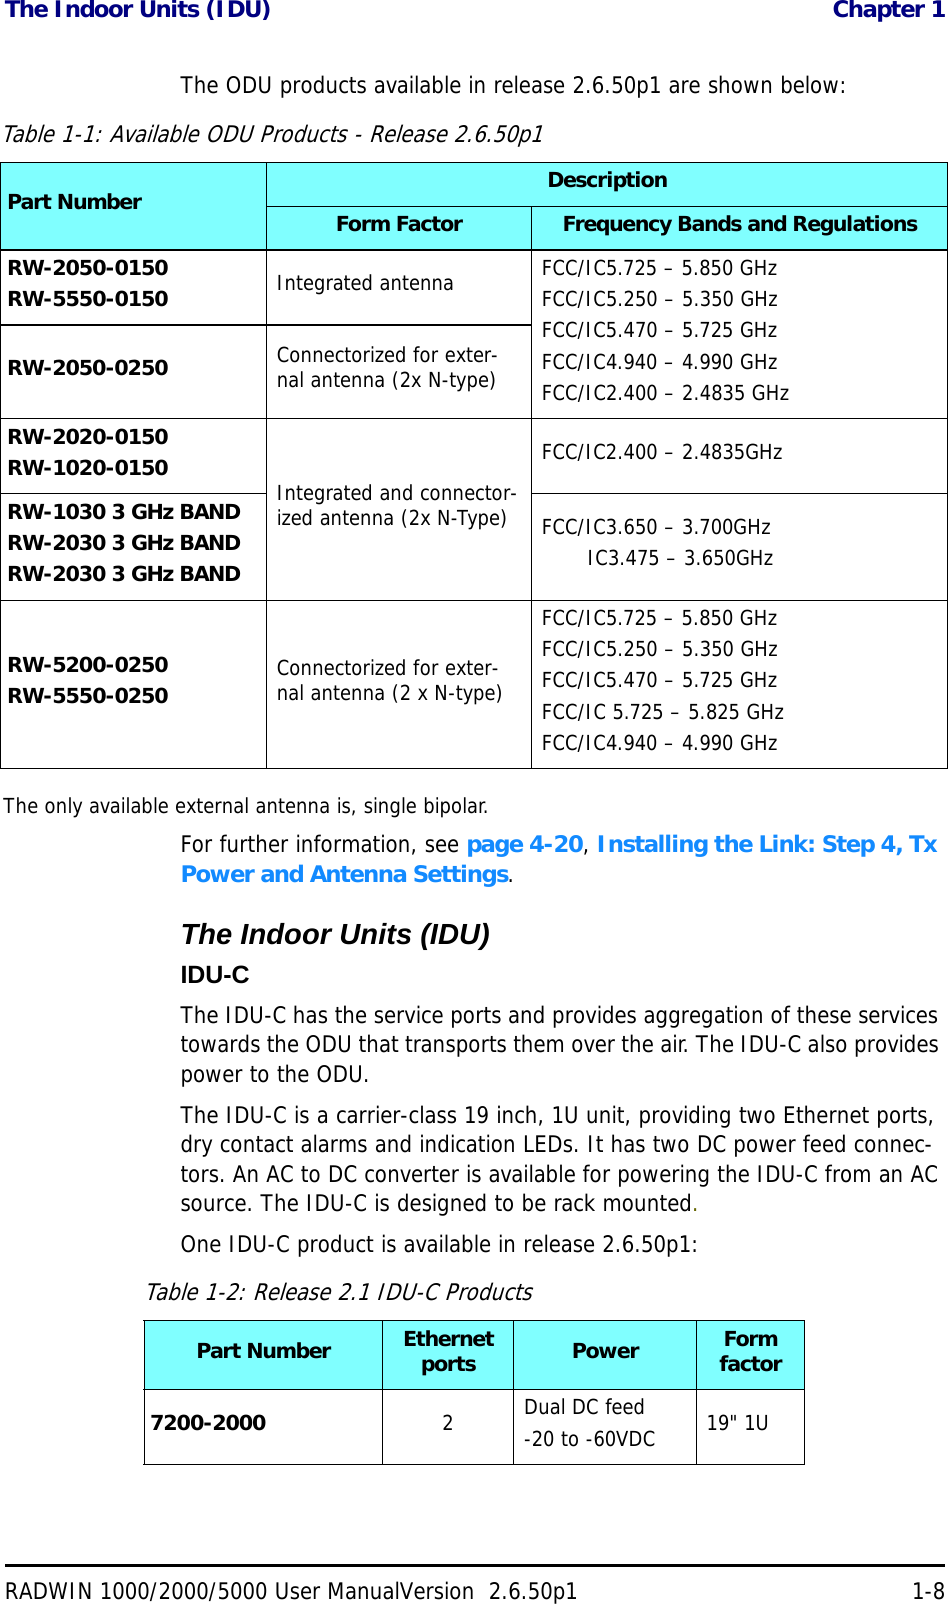 The Indoor Units (IDU)  Chapter 1RADWIN 1000/2000/5000 User ManualVersion  2.6.50p1 1-8The ODU products available in release 2.6.50p1 are shown below:The only available external antenna is, single bipolar.For further information, see page 4-20, Installing the Link: Step 4, Tx Power and Antenna Settings.The Indoor Units (IDU)IDU-CThe IDU-C has the service ports and provides aggregation of these services towards the ODU that transports them over the air. The IDU-C also provides power to the ODU.The IDU-C is a carrier-class 19 inch, 1U unit, providing two Ethernet ports, dry contact alarms and indication LEDs. It has two DC power feed connec-tors. An AC to DC converter is available for powering the IDU-C from an AC source. The IDU-C is designed to be rack mounted.One IDU-C product is available in release 2.6.50p1:Table 1-1: Available ODU Products - Release 2.6.50p1Part Number DescriptionForm Factor Frequency Bands and RegulationsRW-2050-0150RW-5550-0150 Integrated antenna  FCC/IC5.725 – 5.850 GHzFCC/IC5.250 – 5.350 GHzFCC/IC5.470 – 5.725 GHzFCC/IC4.940 – 4.990 GHzFCC/IC2.400 – 2.4835 GHzRW-2050-0250 Connectorized for exter-nal antenna (2x N-type)RW-2020-0150RW-1020-0150 Integrated and connector-ized antenna (2x N-Type)FCC/IC2.400 – 2.4835GHzRW-1030 3 GHz BANDRW-2030 3 GHz BANDRW-2030 3 GHz BANDFCC/IC3.650 – 3.700GHz       IC3.475 – 3.650GHzRW-5200-0250RW-5550-0250 Connectorized for exter-nal antenna (2 x N-type)FCC/IC5.725 – 5.850 GHzFCC/IC5.250 – 5.350 GHzFCC/IC5.470 – 5.725 GHzFCC/IC 5.725 – 5.825 GHzFCC/IC4.940 – 4.990 GHzTable 1-2: Release 2.1 IDU-C ProductsPart Number Ethernet ports Power Form factor7200-2000 2Dual DC feed-20 to -60VDC 19&quot; 1U